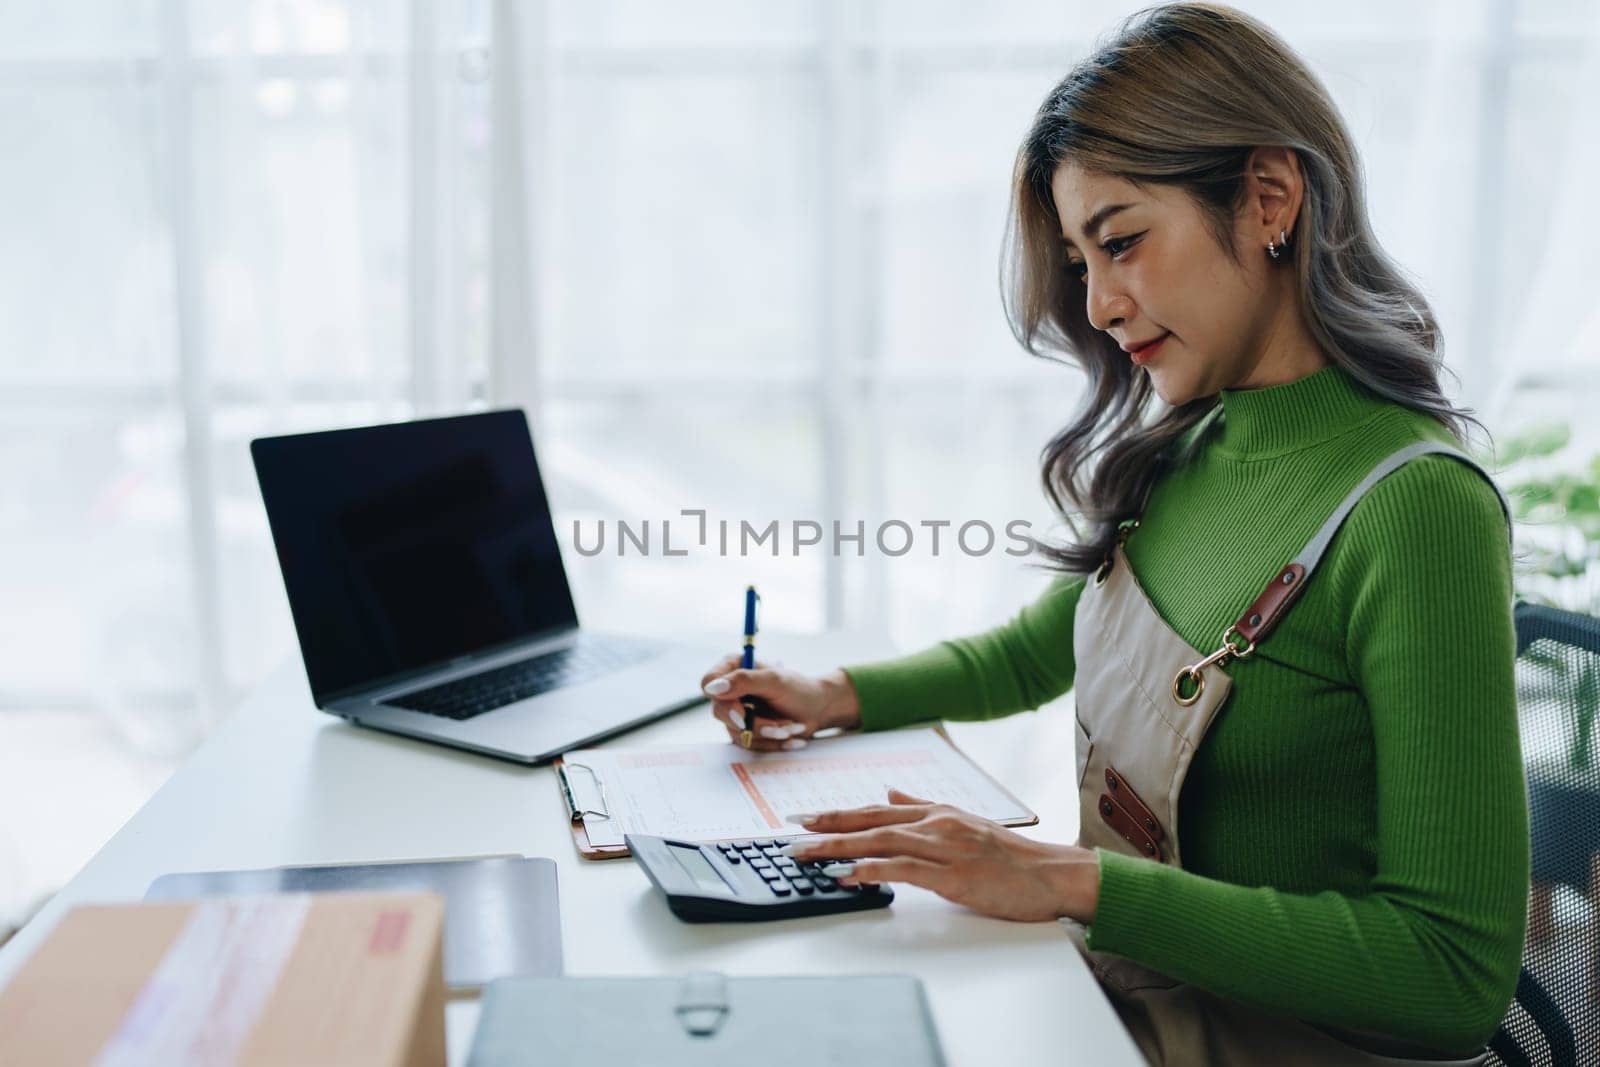 Small business, online business owner, young woman is using profit calculator and checking inventory.